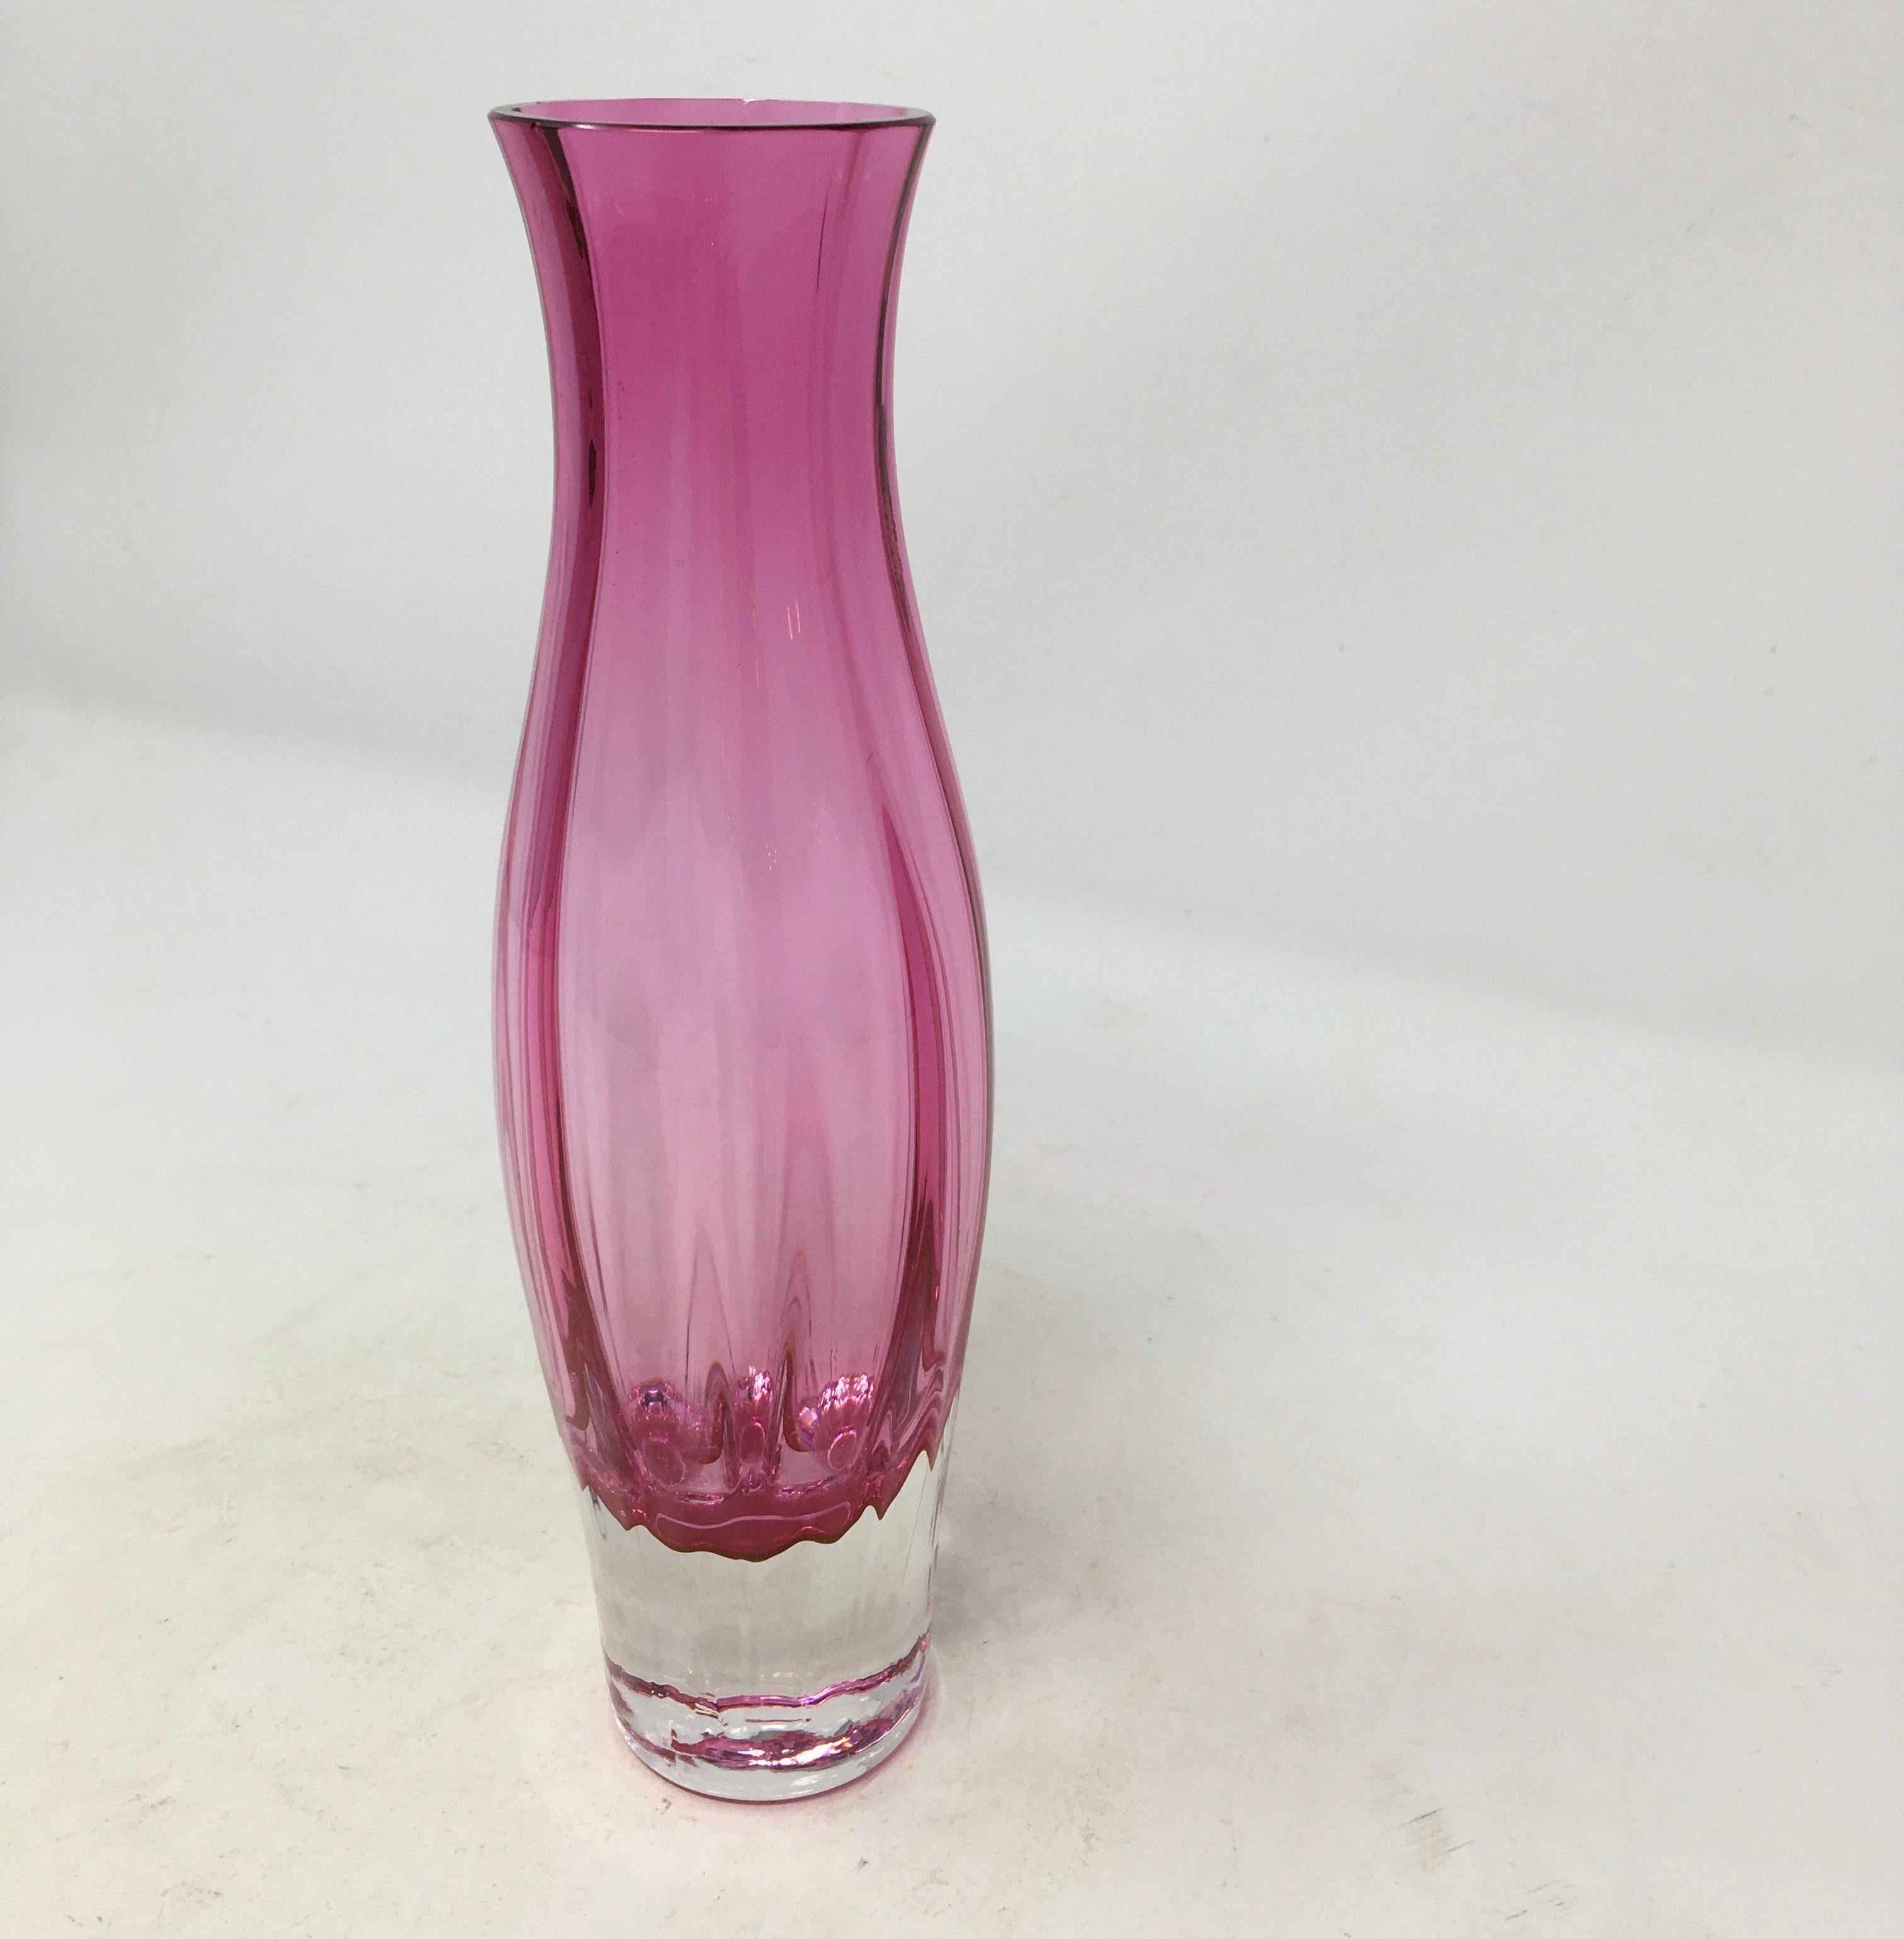 This is a beautiful cranberry color glass vase made in England by Dartington. Lovingly handcrafted in Devon, this vase will add a pop of color to your home.

This piece weighs 1 lb.